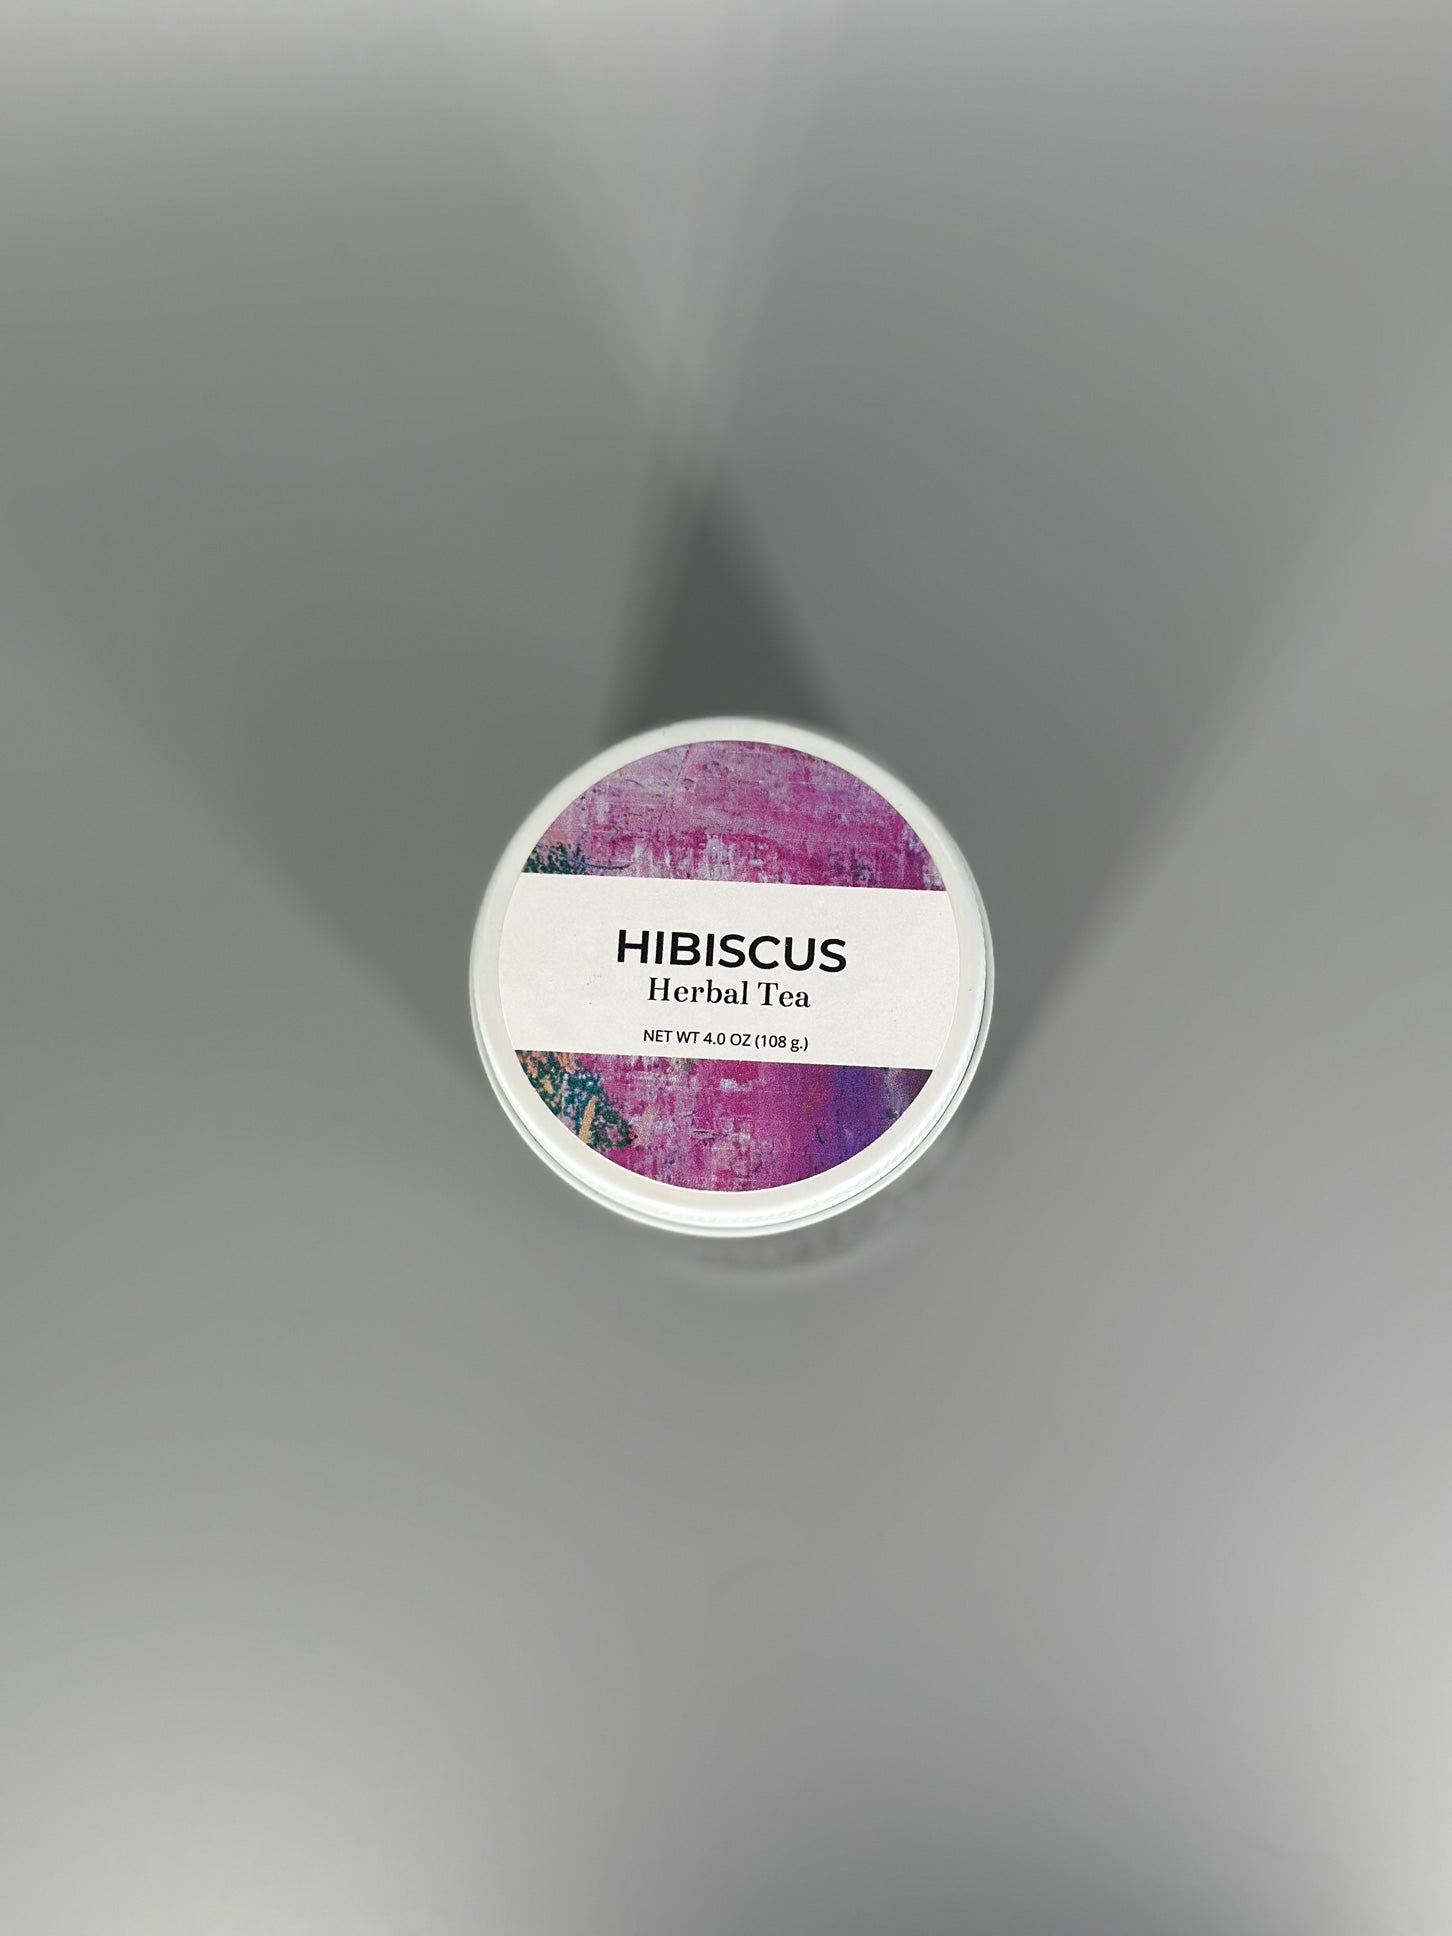 Chicory Tea Co.'s Hibiscus Herbal Tea, view from the top